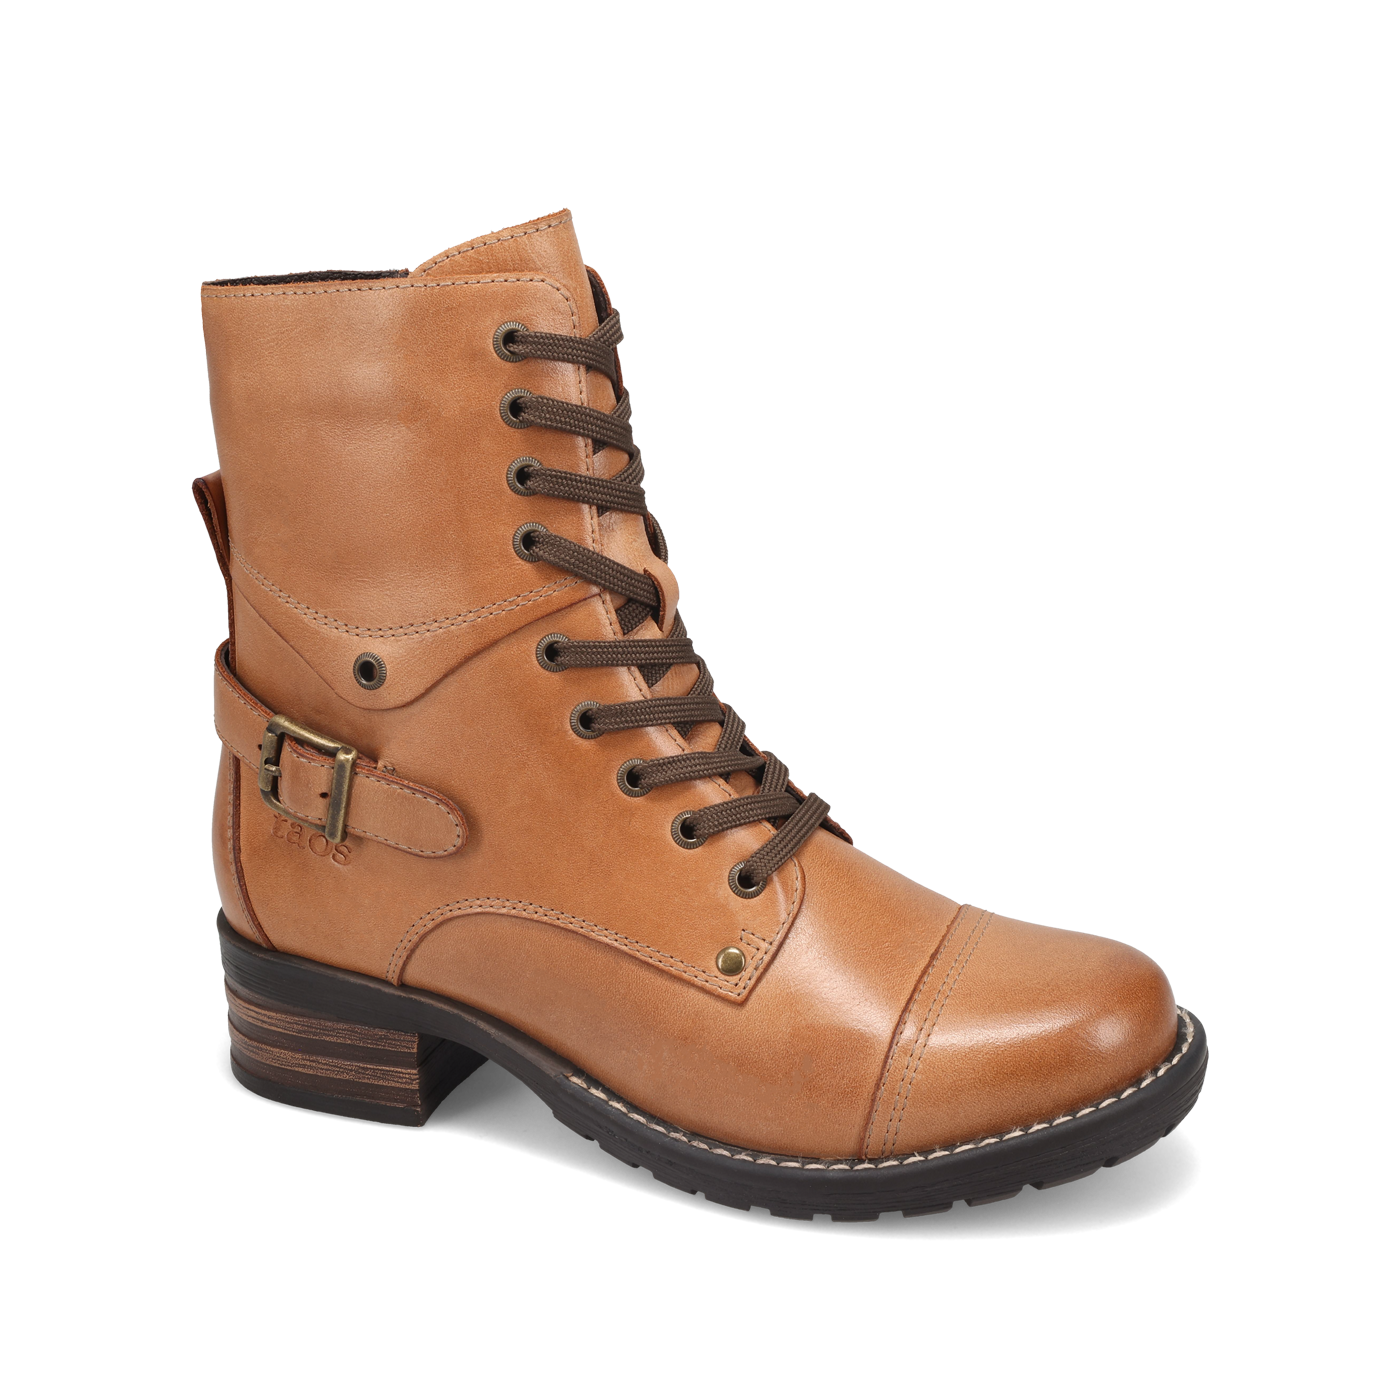 Women's Boots with Arch Support